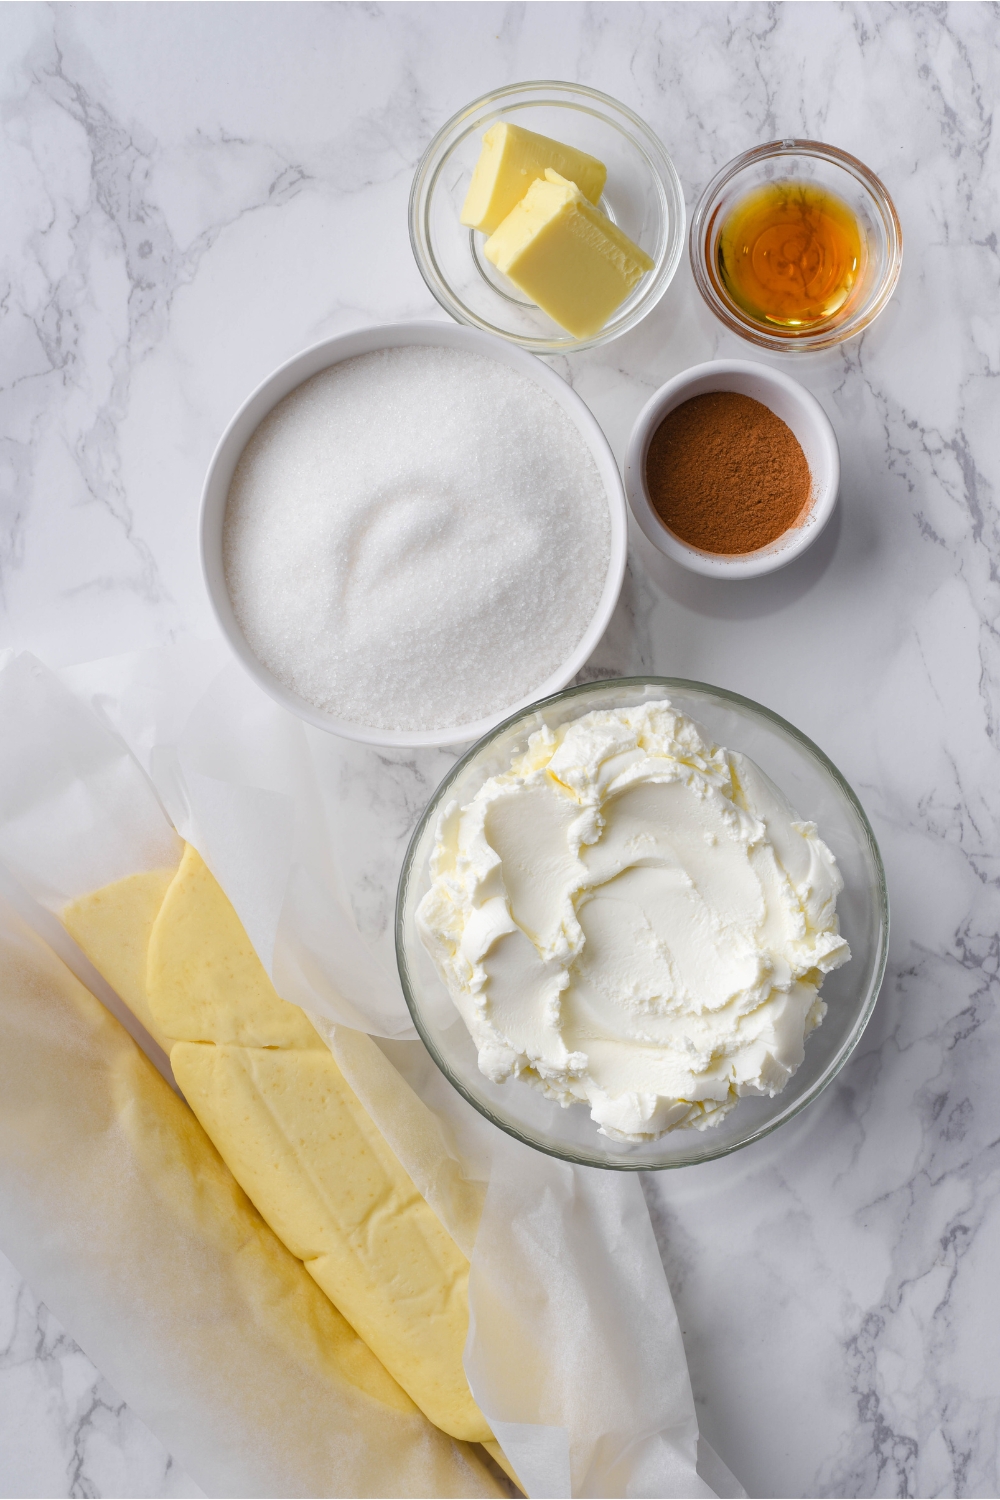 An assortment of ingredients including bowls of cream cheese, white sugar, vanilla extract, cinnamon, butter, and a roll of crescent dough wrapped in parchment paper.